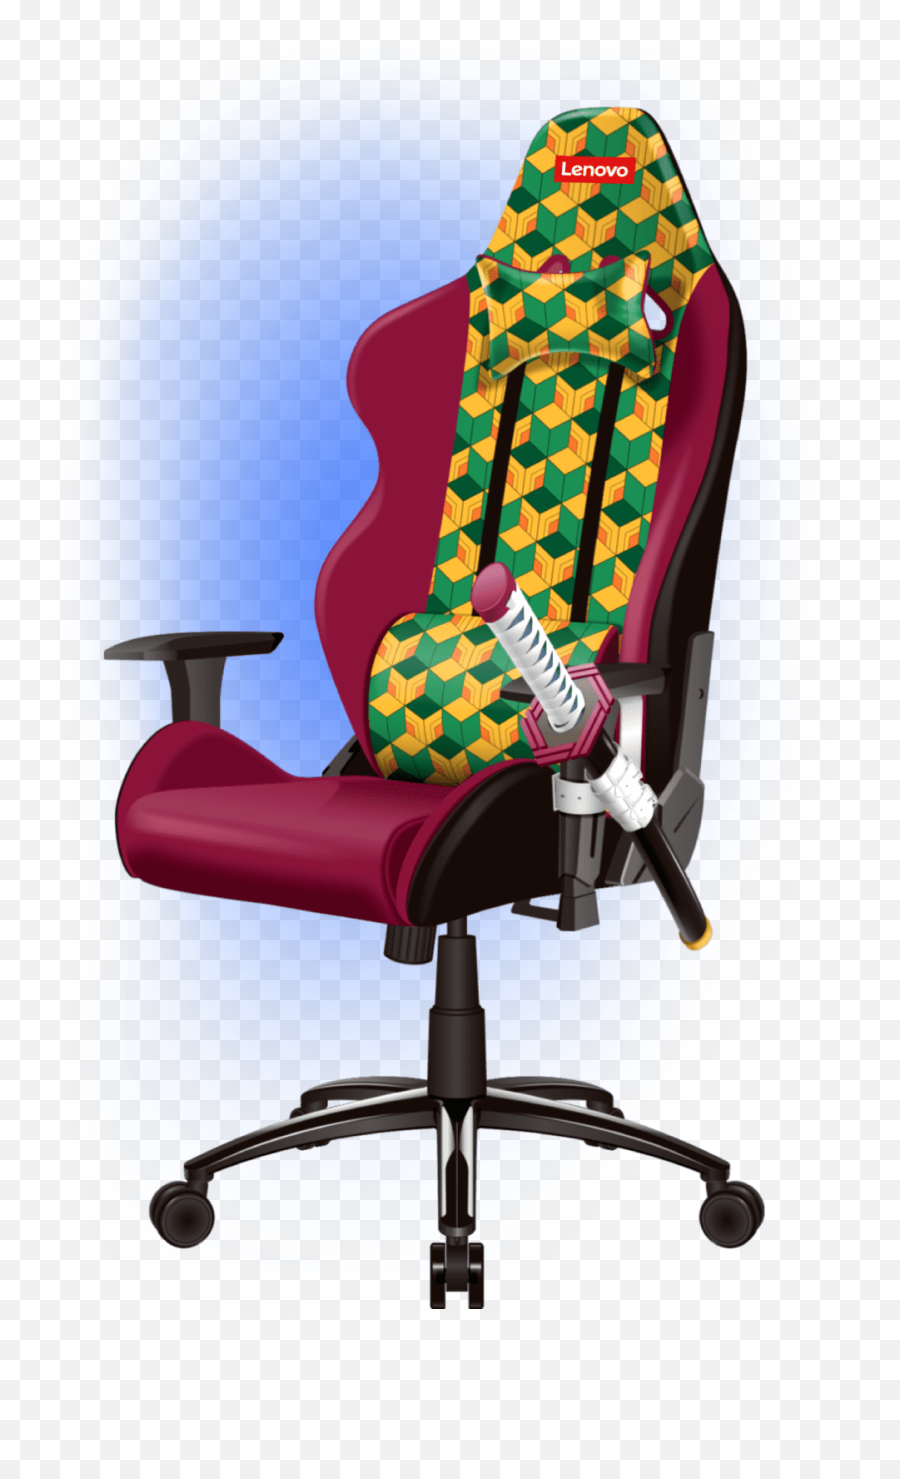 Lenovo Demon Slayer The Gaming Chair Including Katana - Ruetir Demon Slayer Gaming Chair Emoji,Katana Png